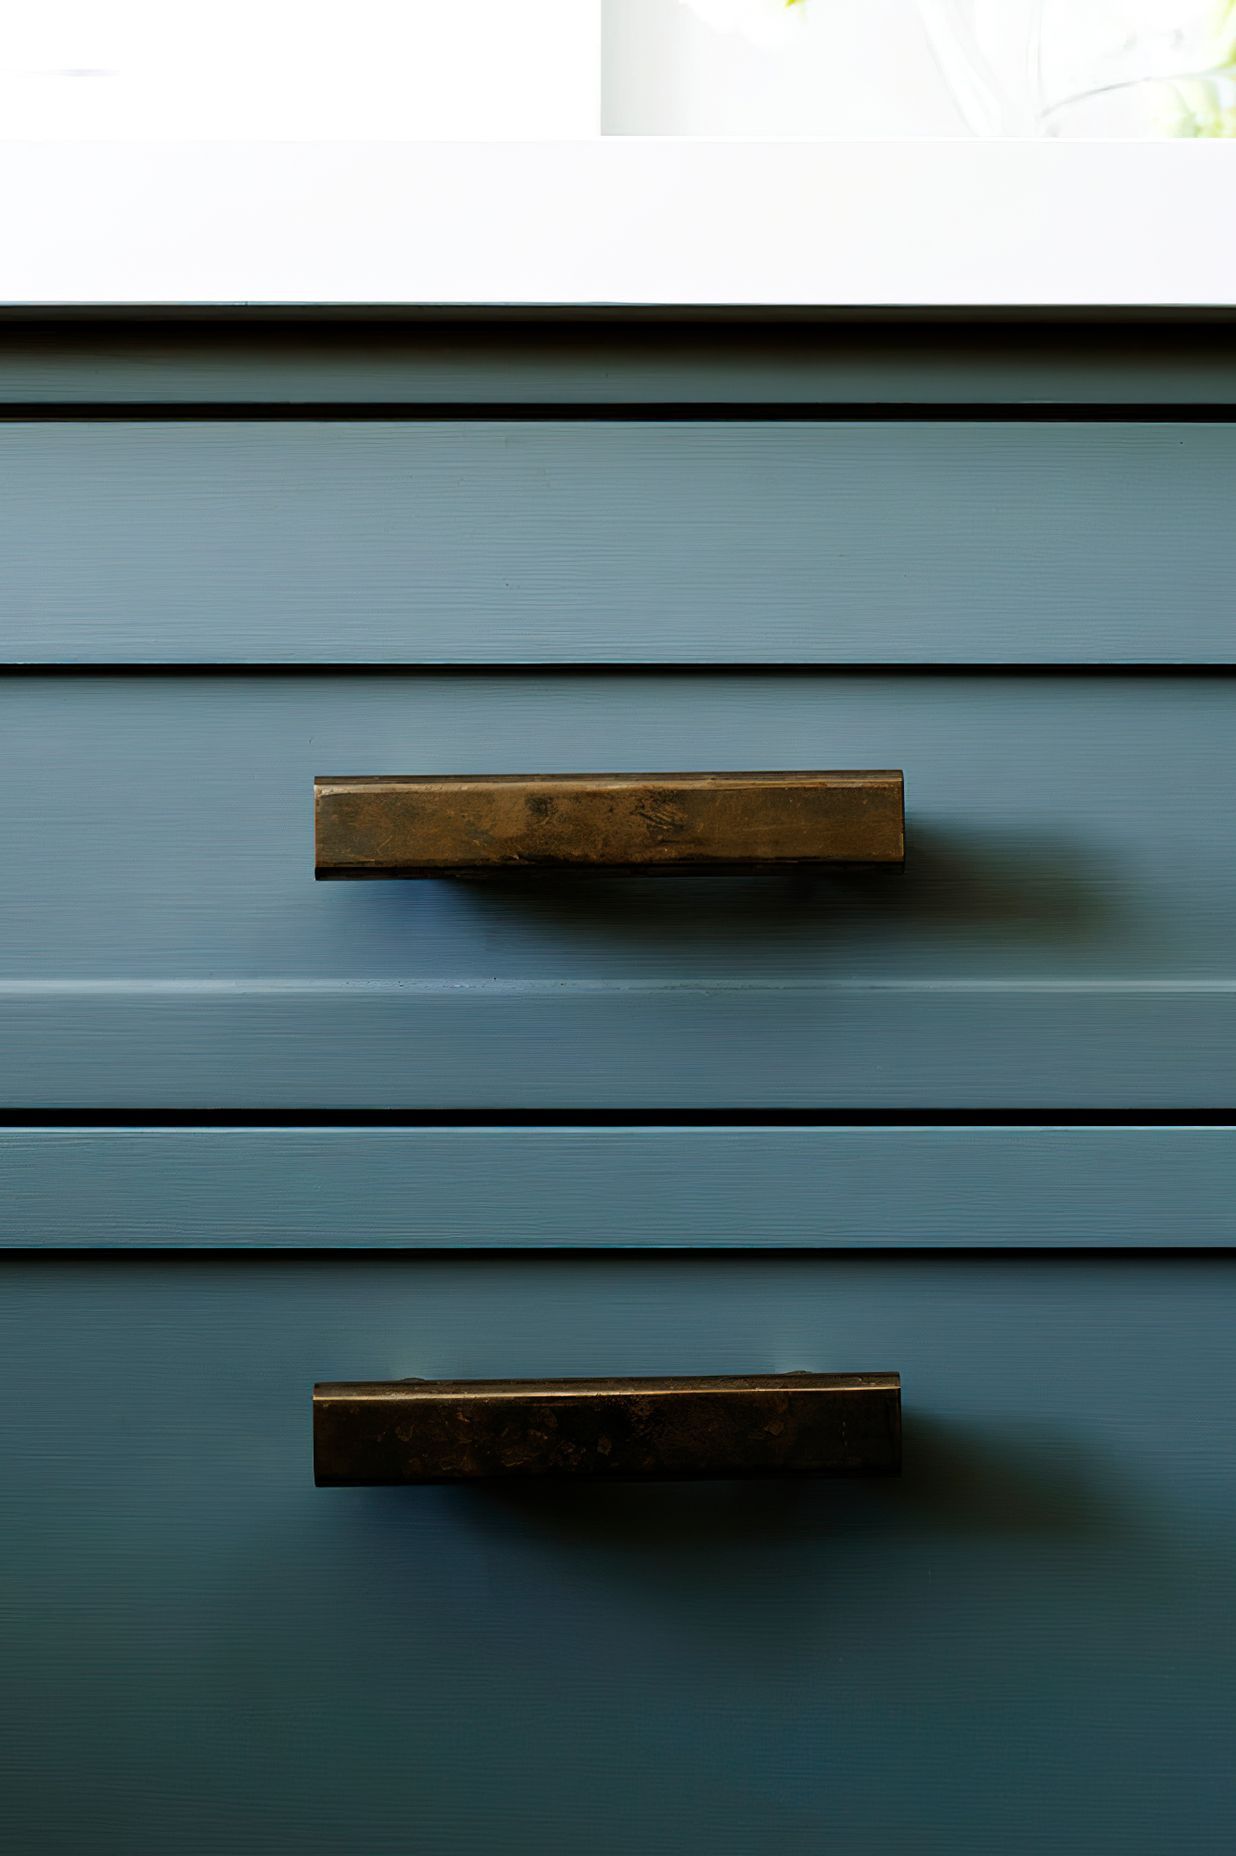 CUSTOM KITCHEN HANDLES - Custom handles were created for this special blue grey kitchen in Mosman.